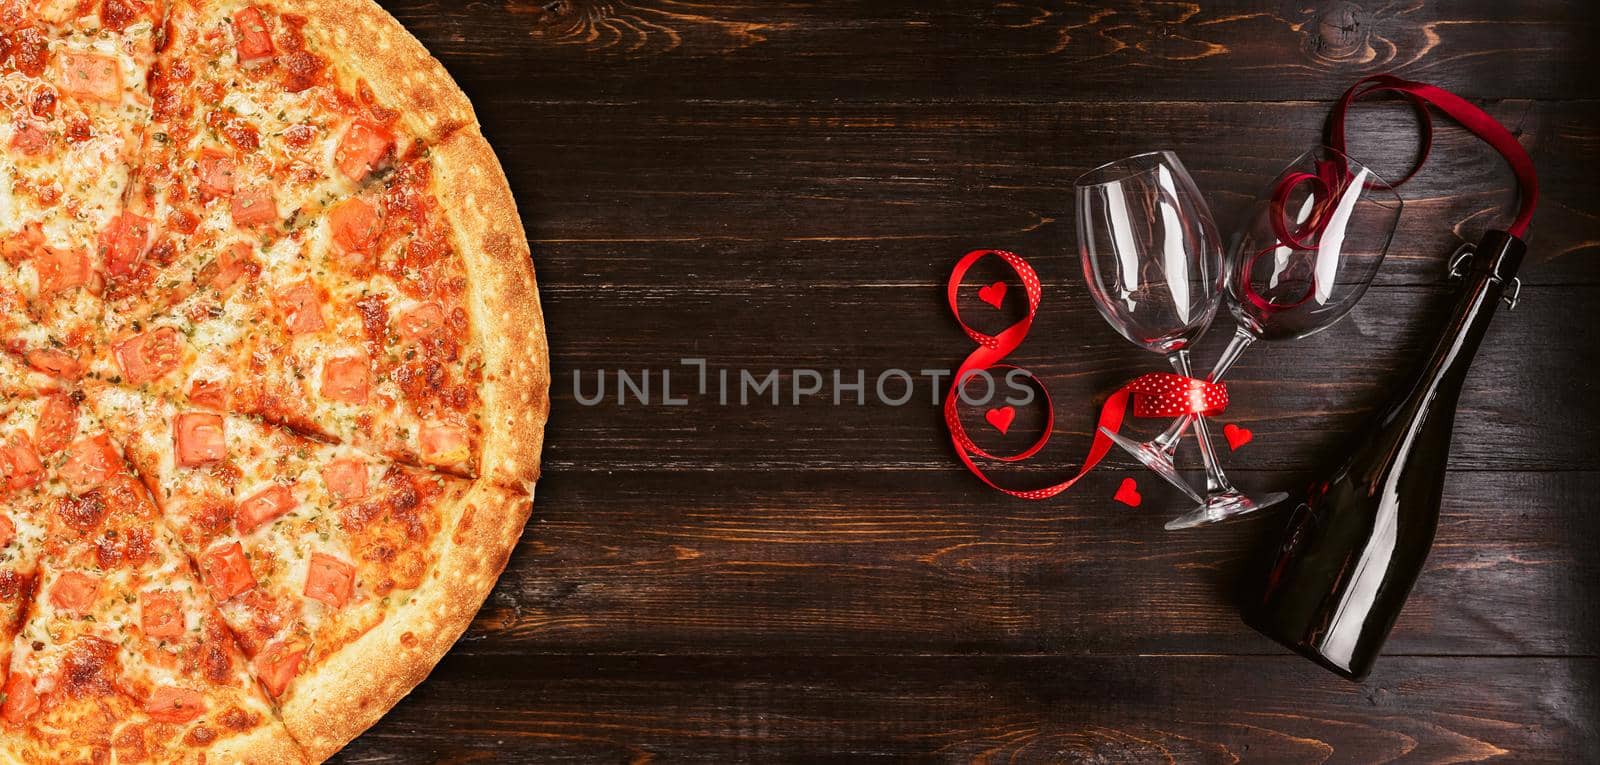 dinner for two in honor of Valentine's Day with pizza and wine.